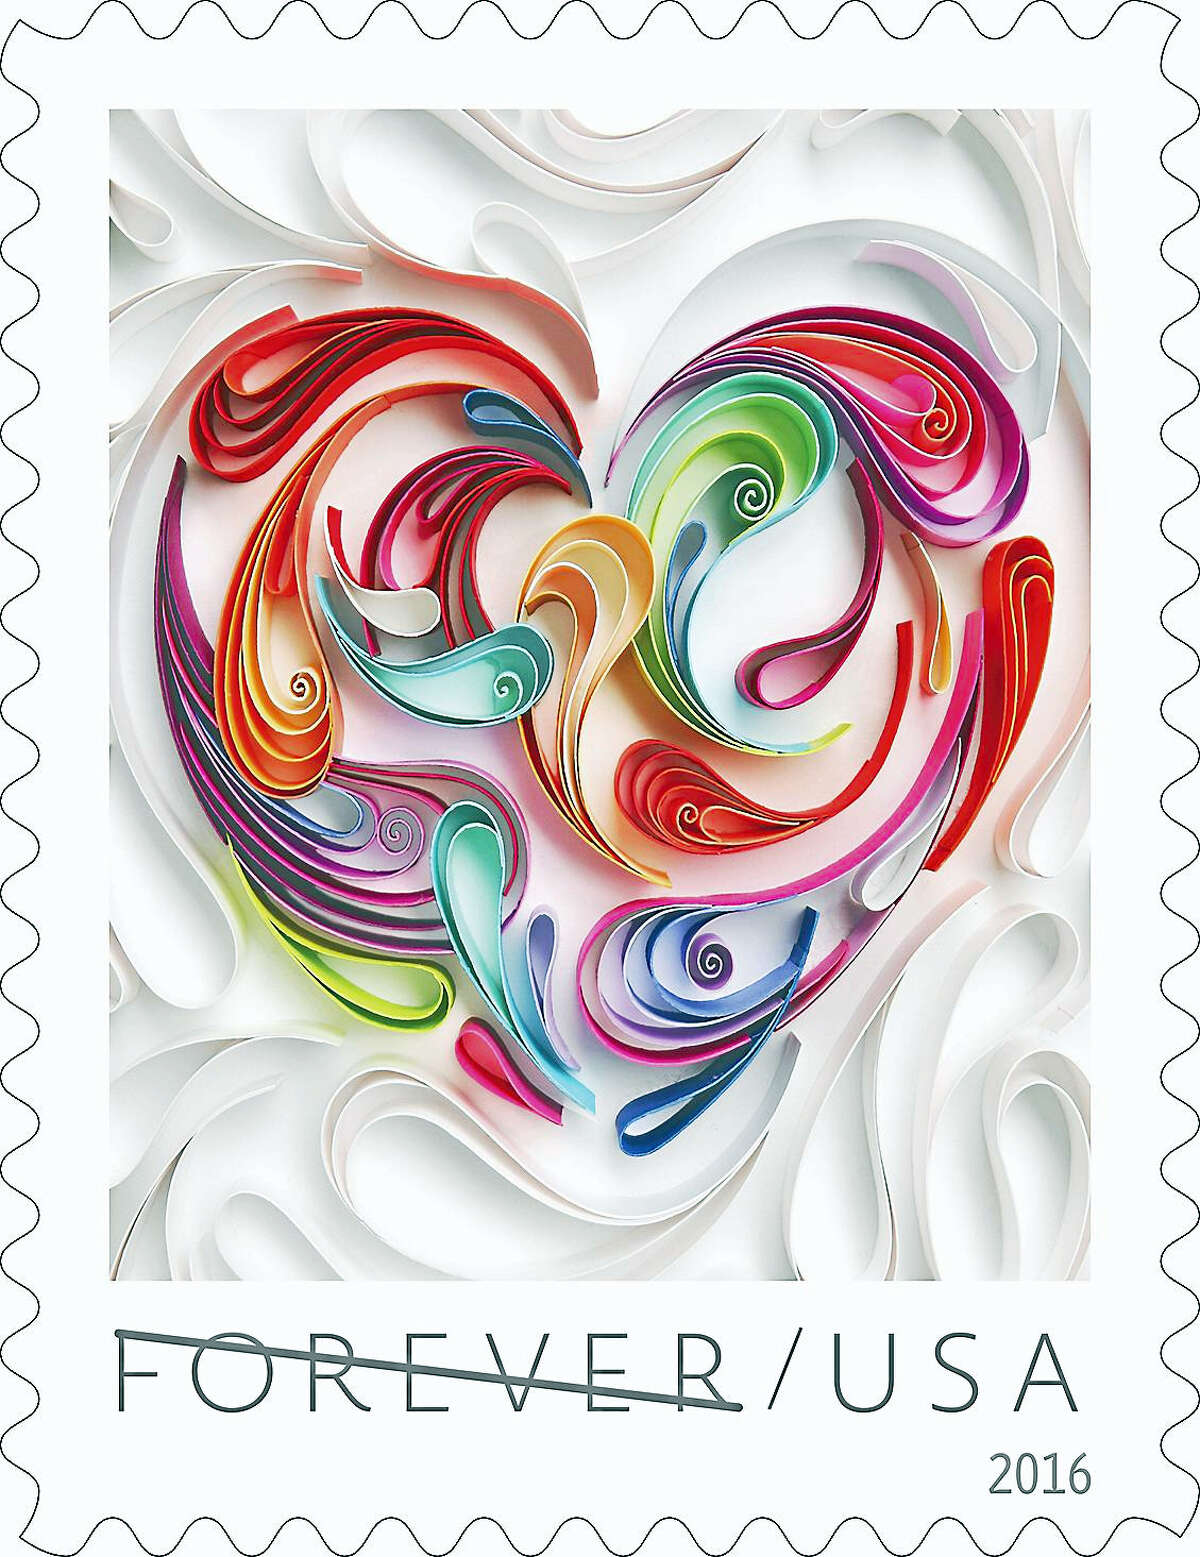 The 2016 Love stamp — a Quilled Paper Heart Forever stamp. The line through “Forever” is no reflection on the love theme, said a postal spokesman; it’s to prevent counterfeiting in this display only.